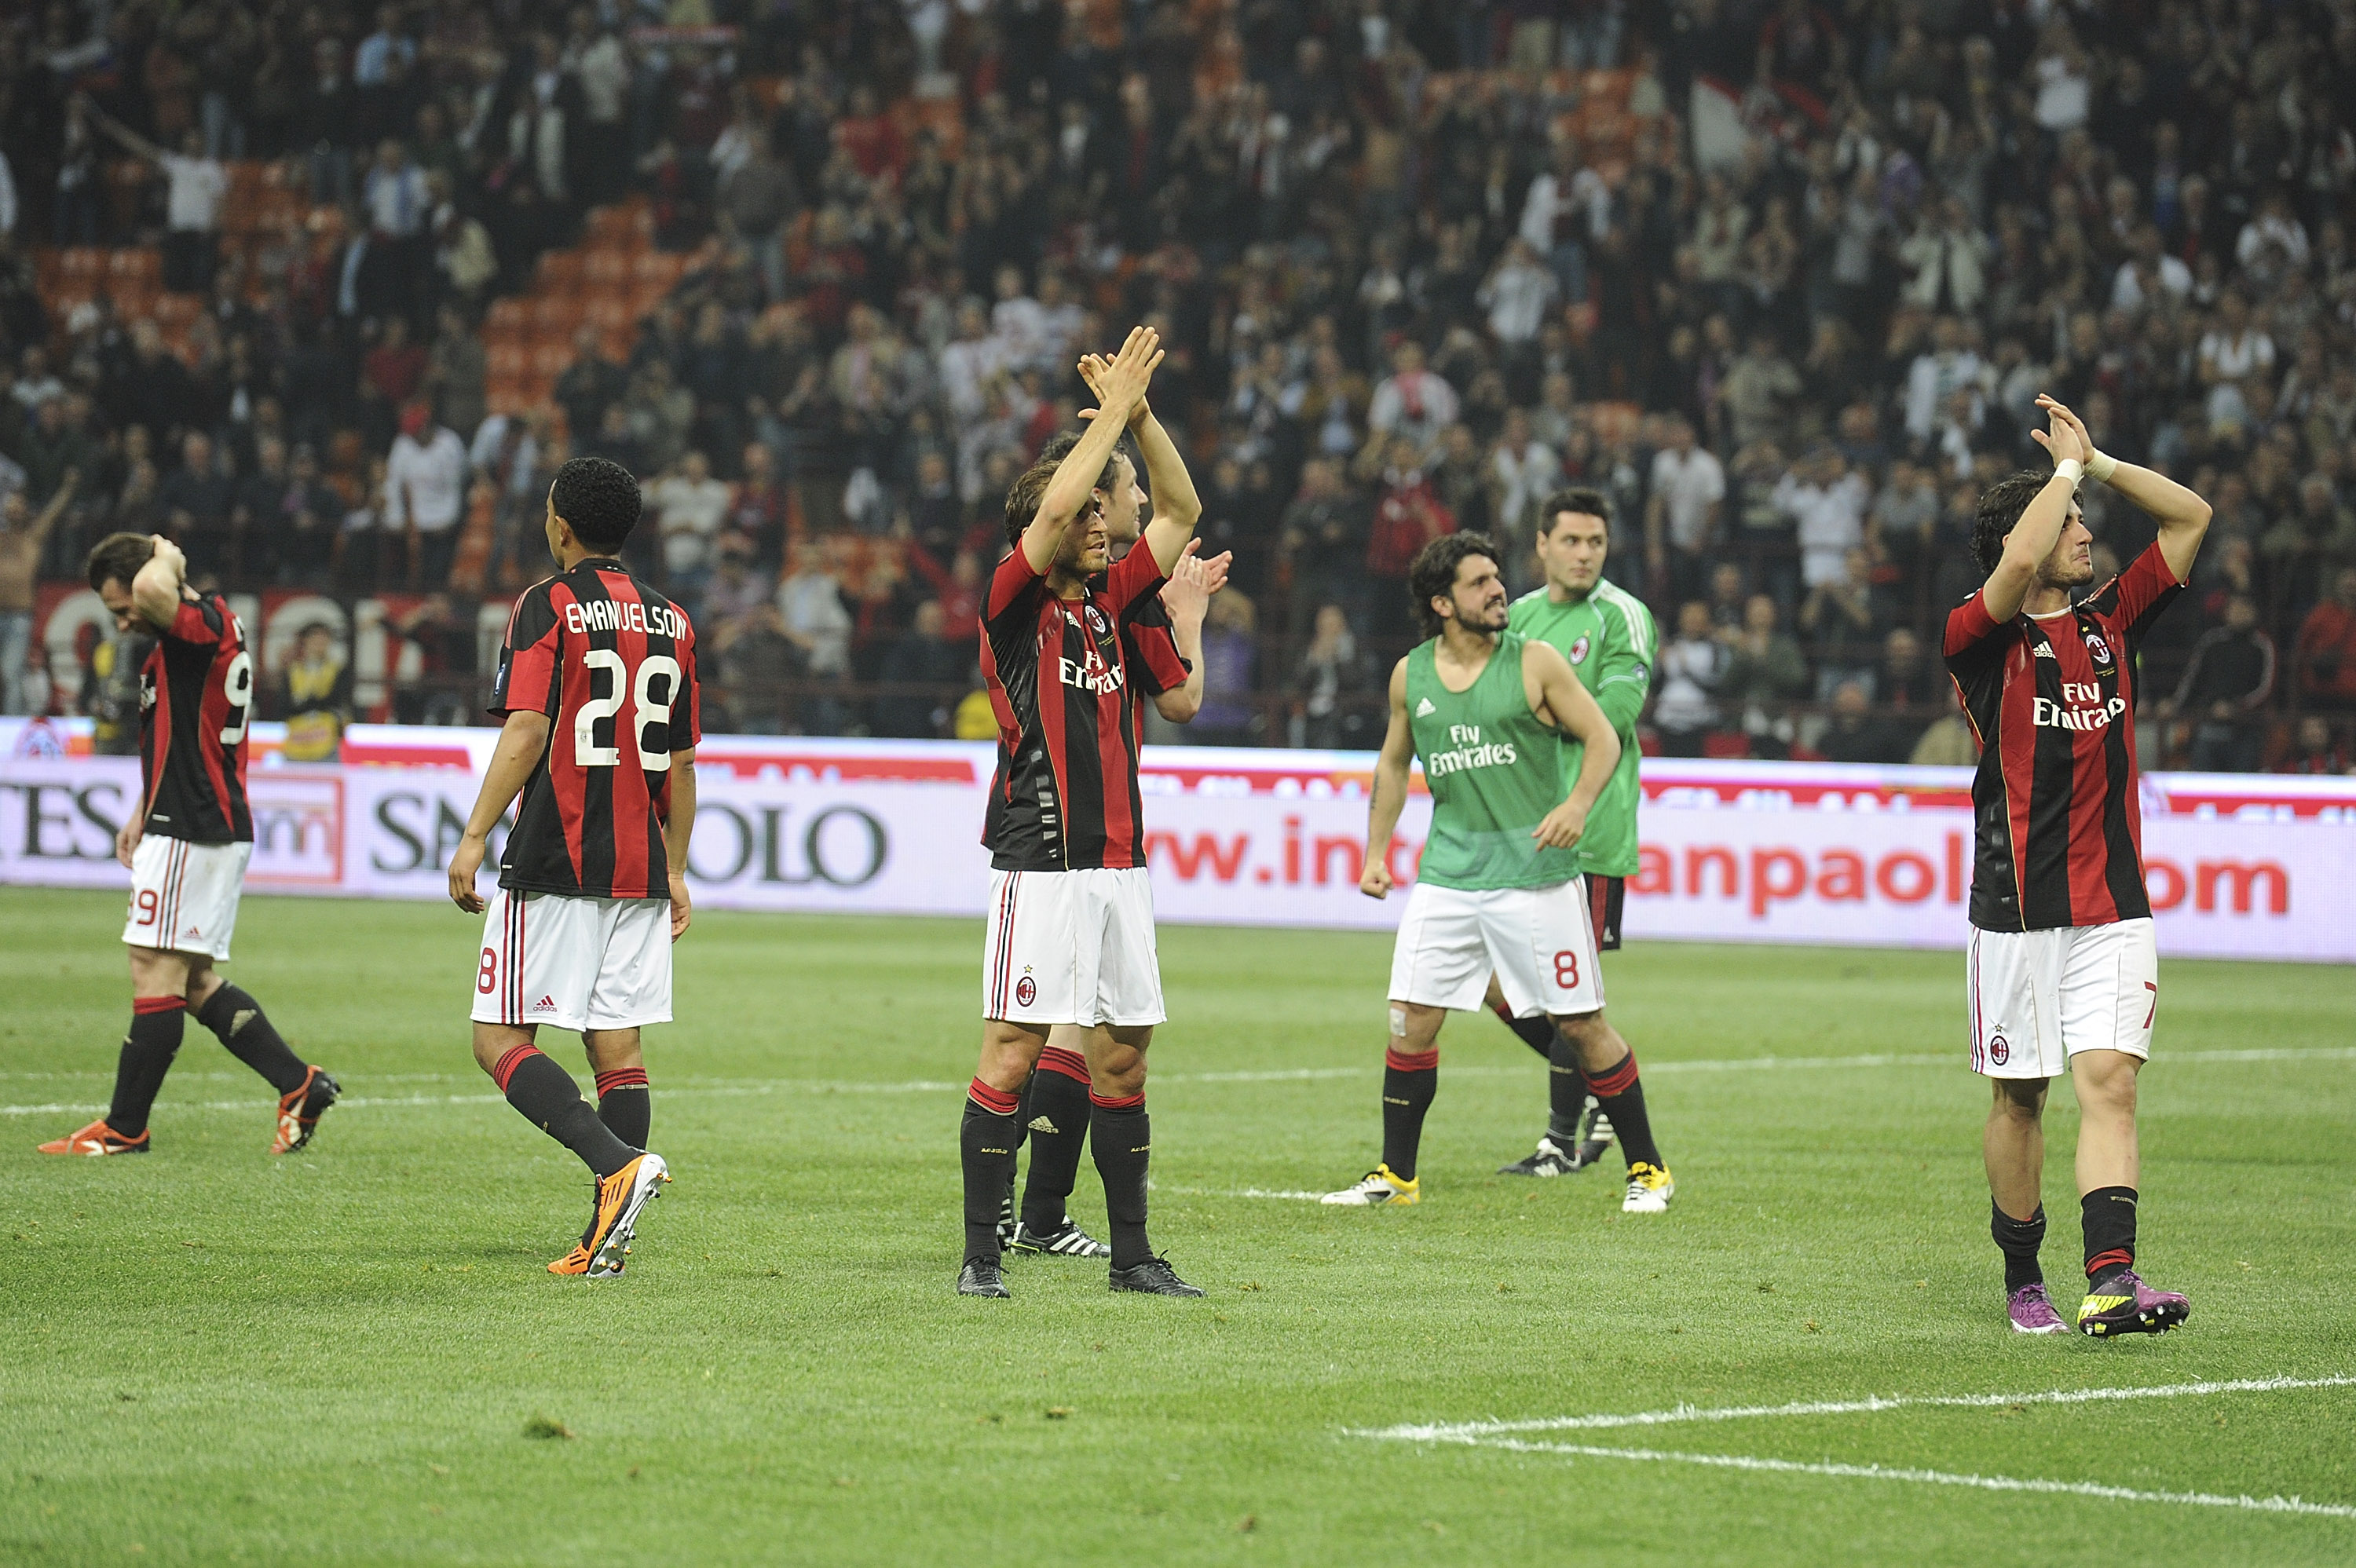 MILAN, ITALY - APRIL 02:  AC Milan players celebrate victory after the Serie A match between AC Milan and FC Internazionale Milano at Stadio Giuseppe Meazza on April 2, 2011 in Milan, Italy.  (Photo by Dino Panato/Getty Images)